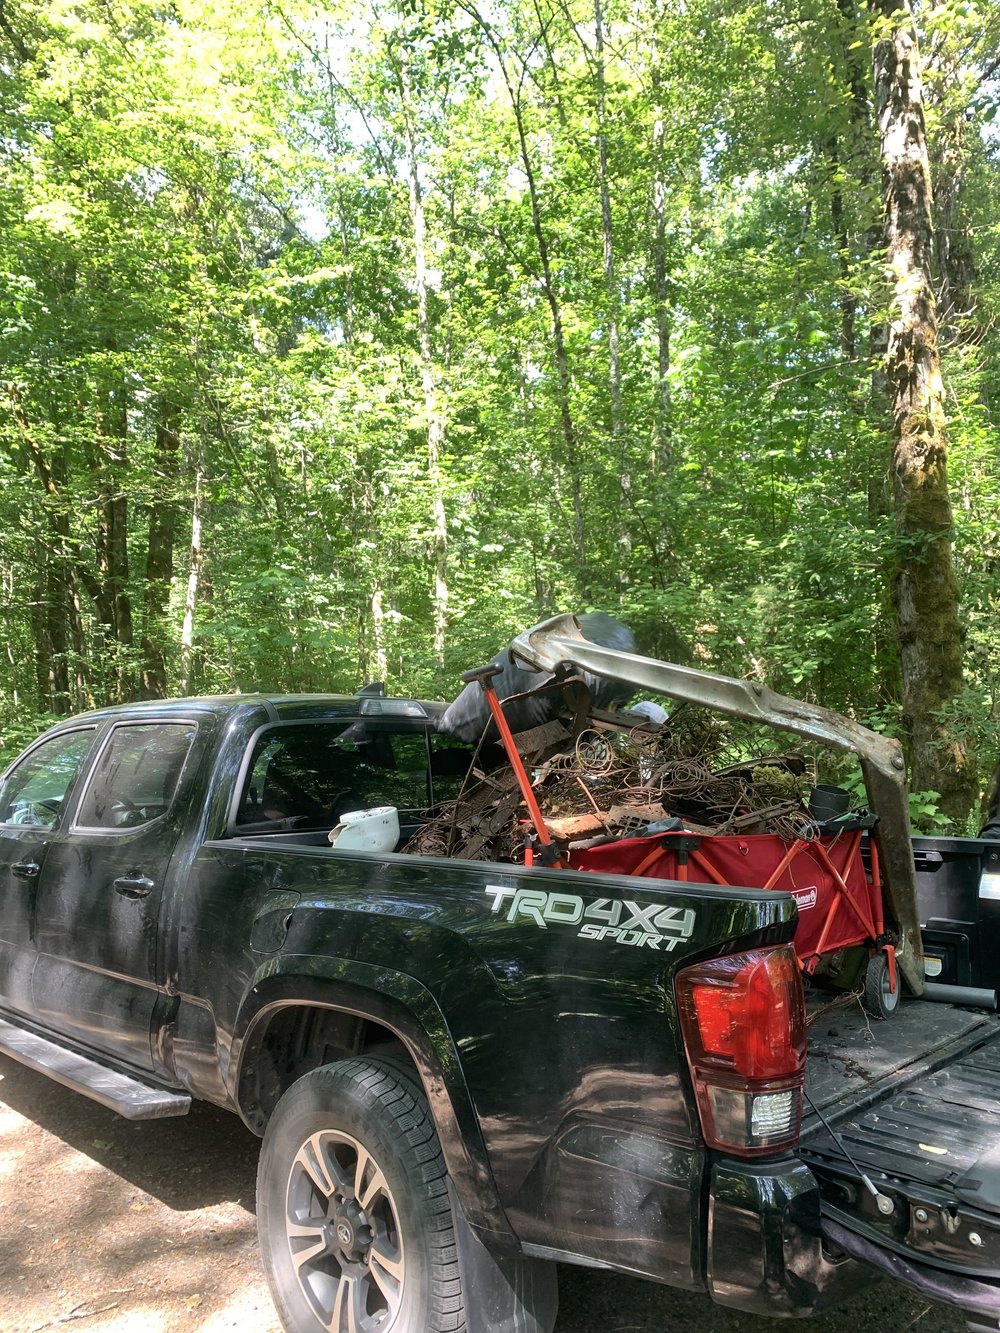 June 1 - truck full of things pulled out of estuary with students.jpg